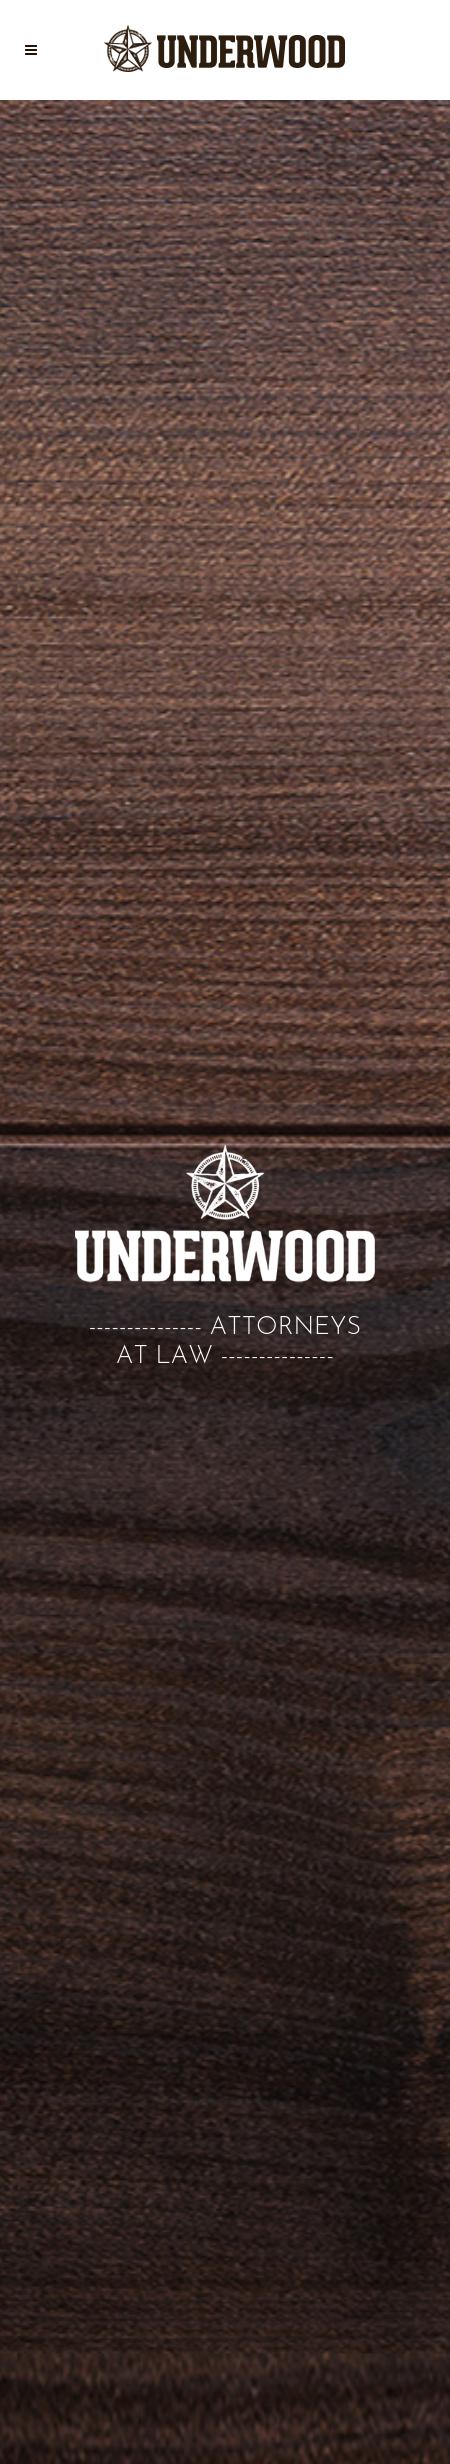 Underwood Law Firm - St Louis MO Lawyers